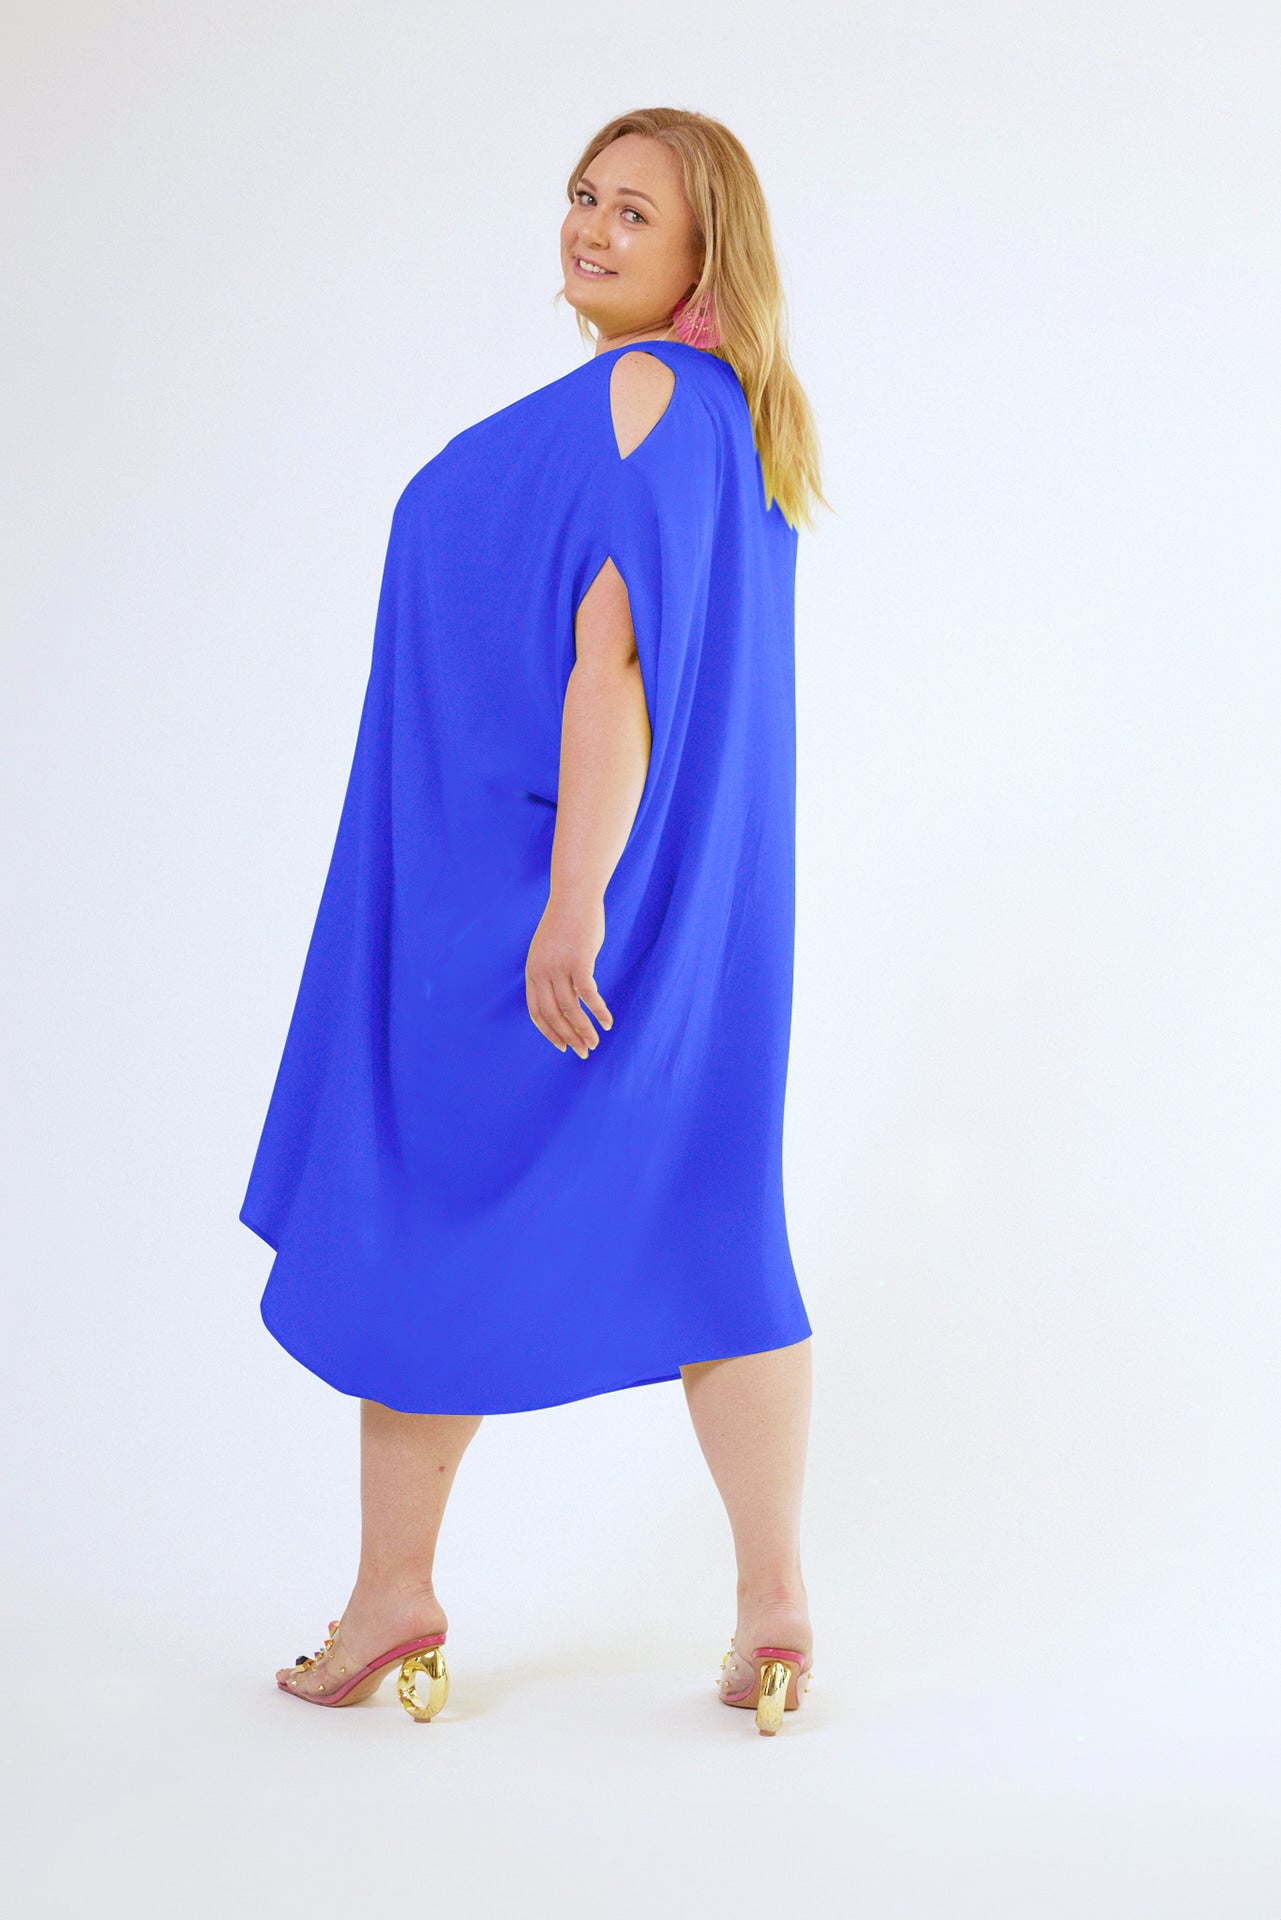 side view of woman modelling a royal blue kaftan duster with front zipper made from recycled materials